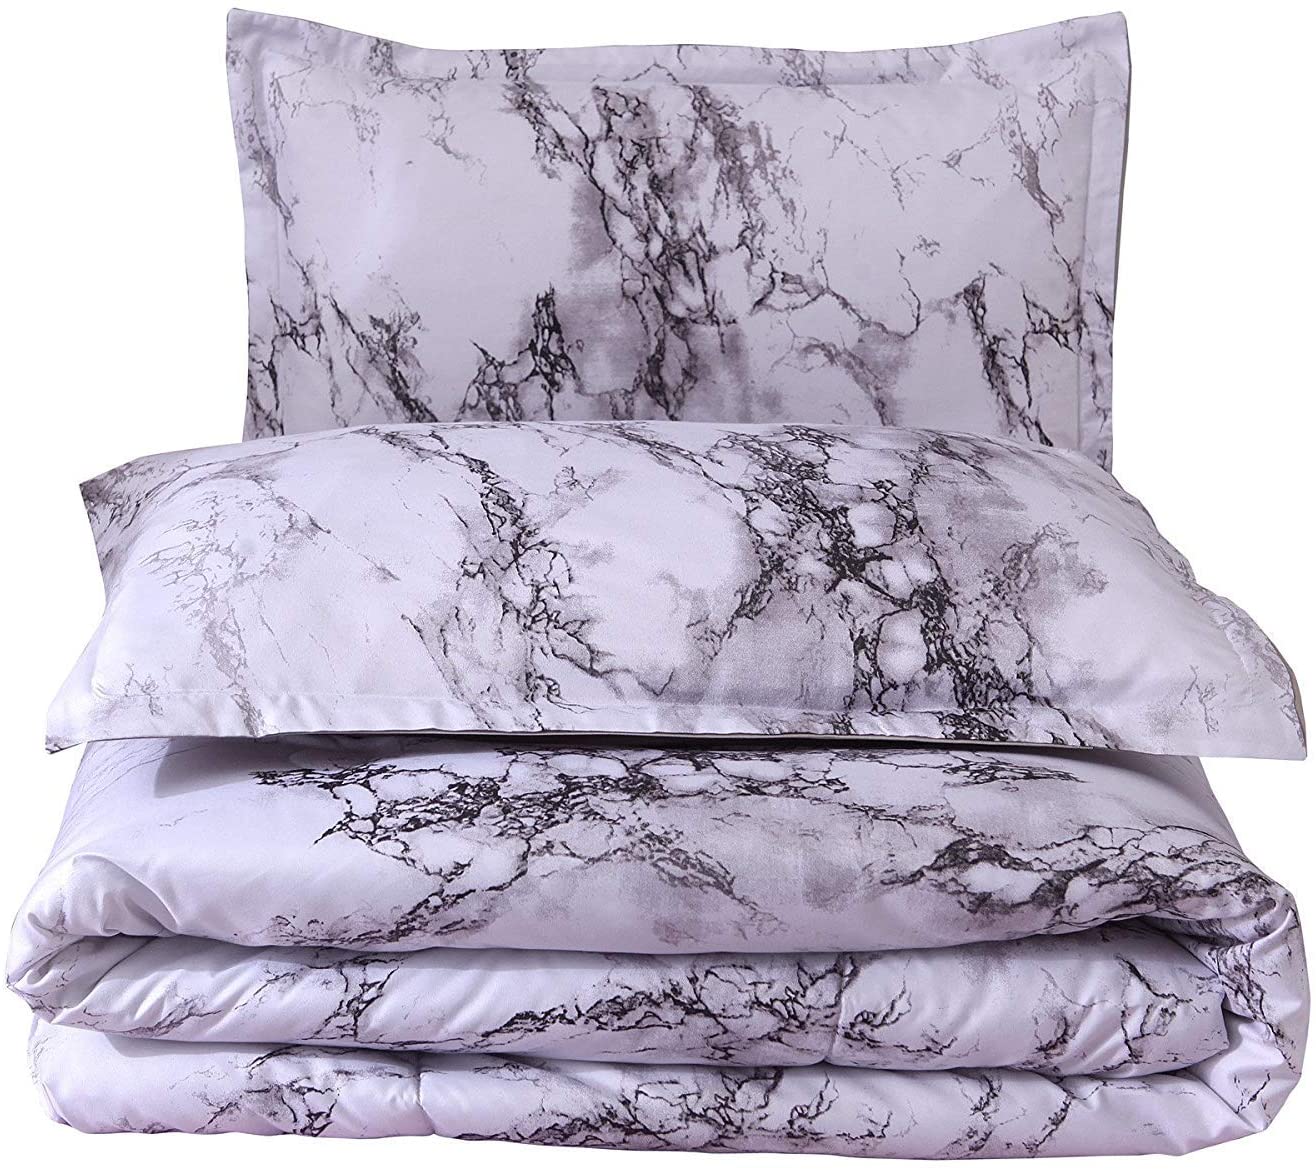 A Nice Night Closure-Printed Marble Ultra Soft Comforter Set Bed-in-a-Bag,Queen